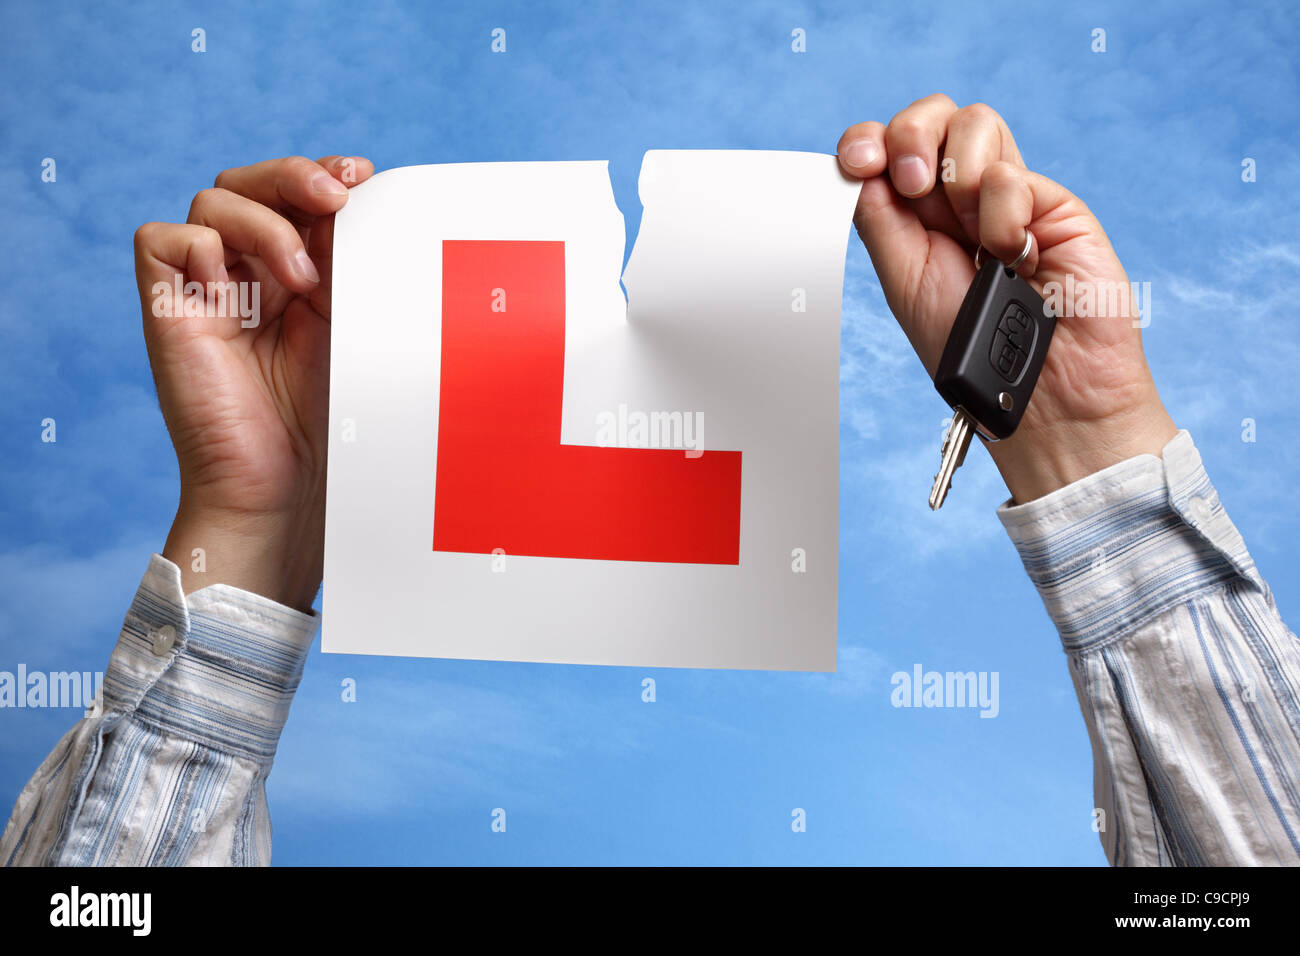 Tearing up L plate after passing driving test Stock Photo